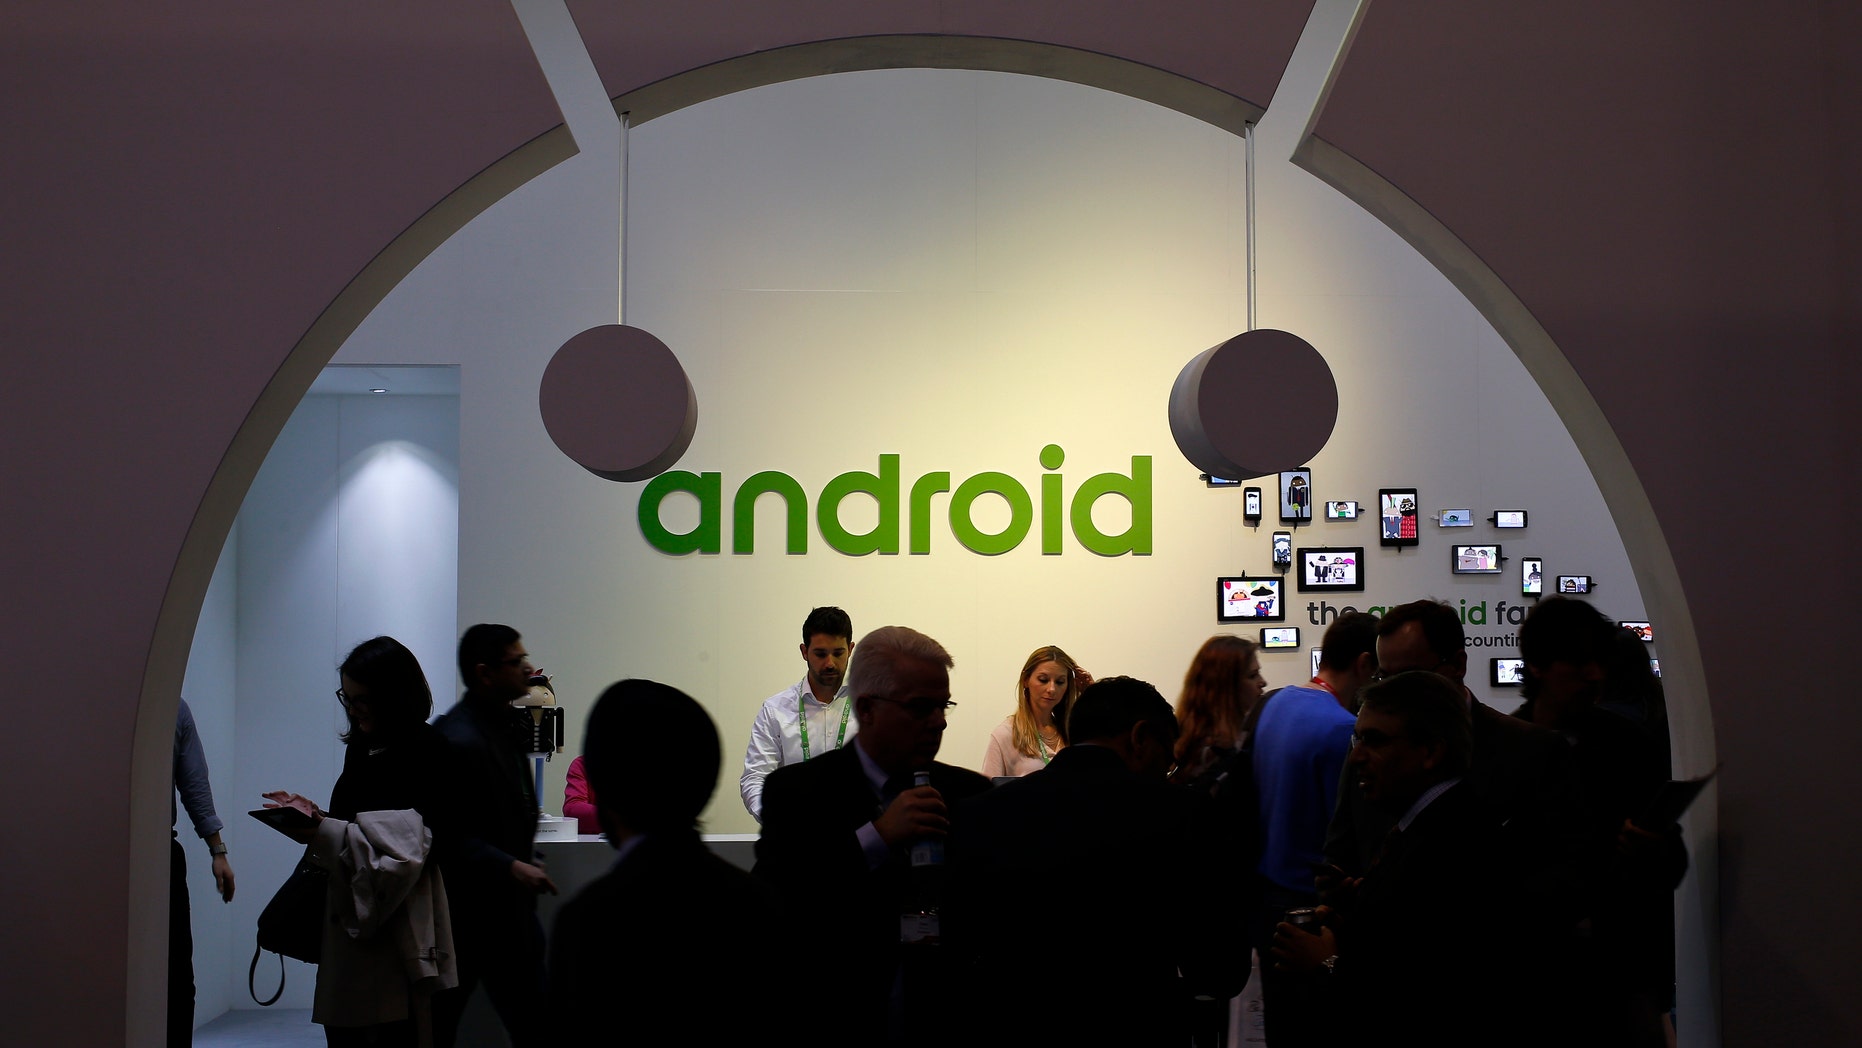 File photo - People visit an Android stand at the Mobile World Congress in Barcelona March 4, 2015.